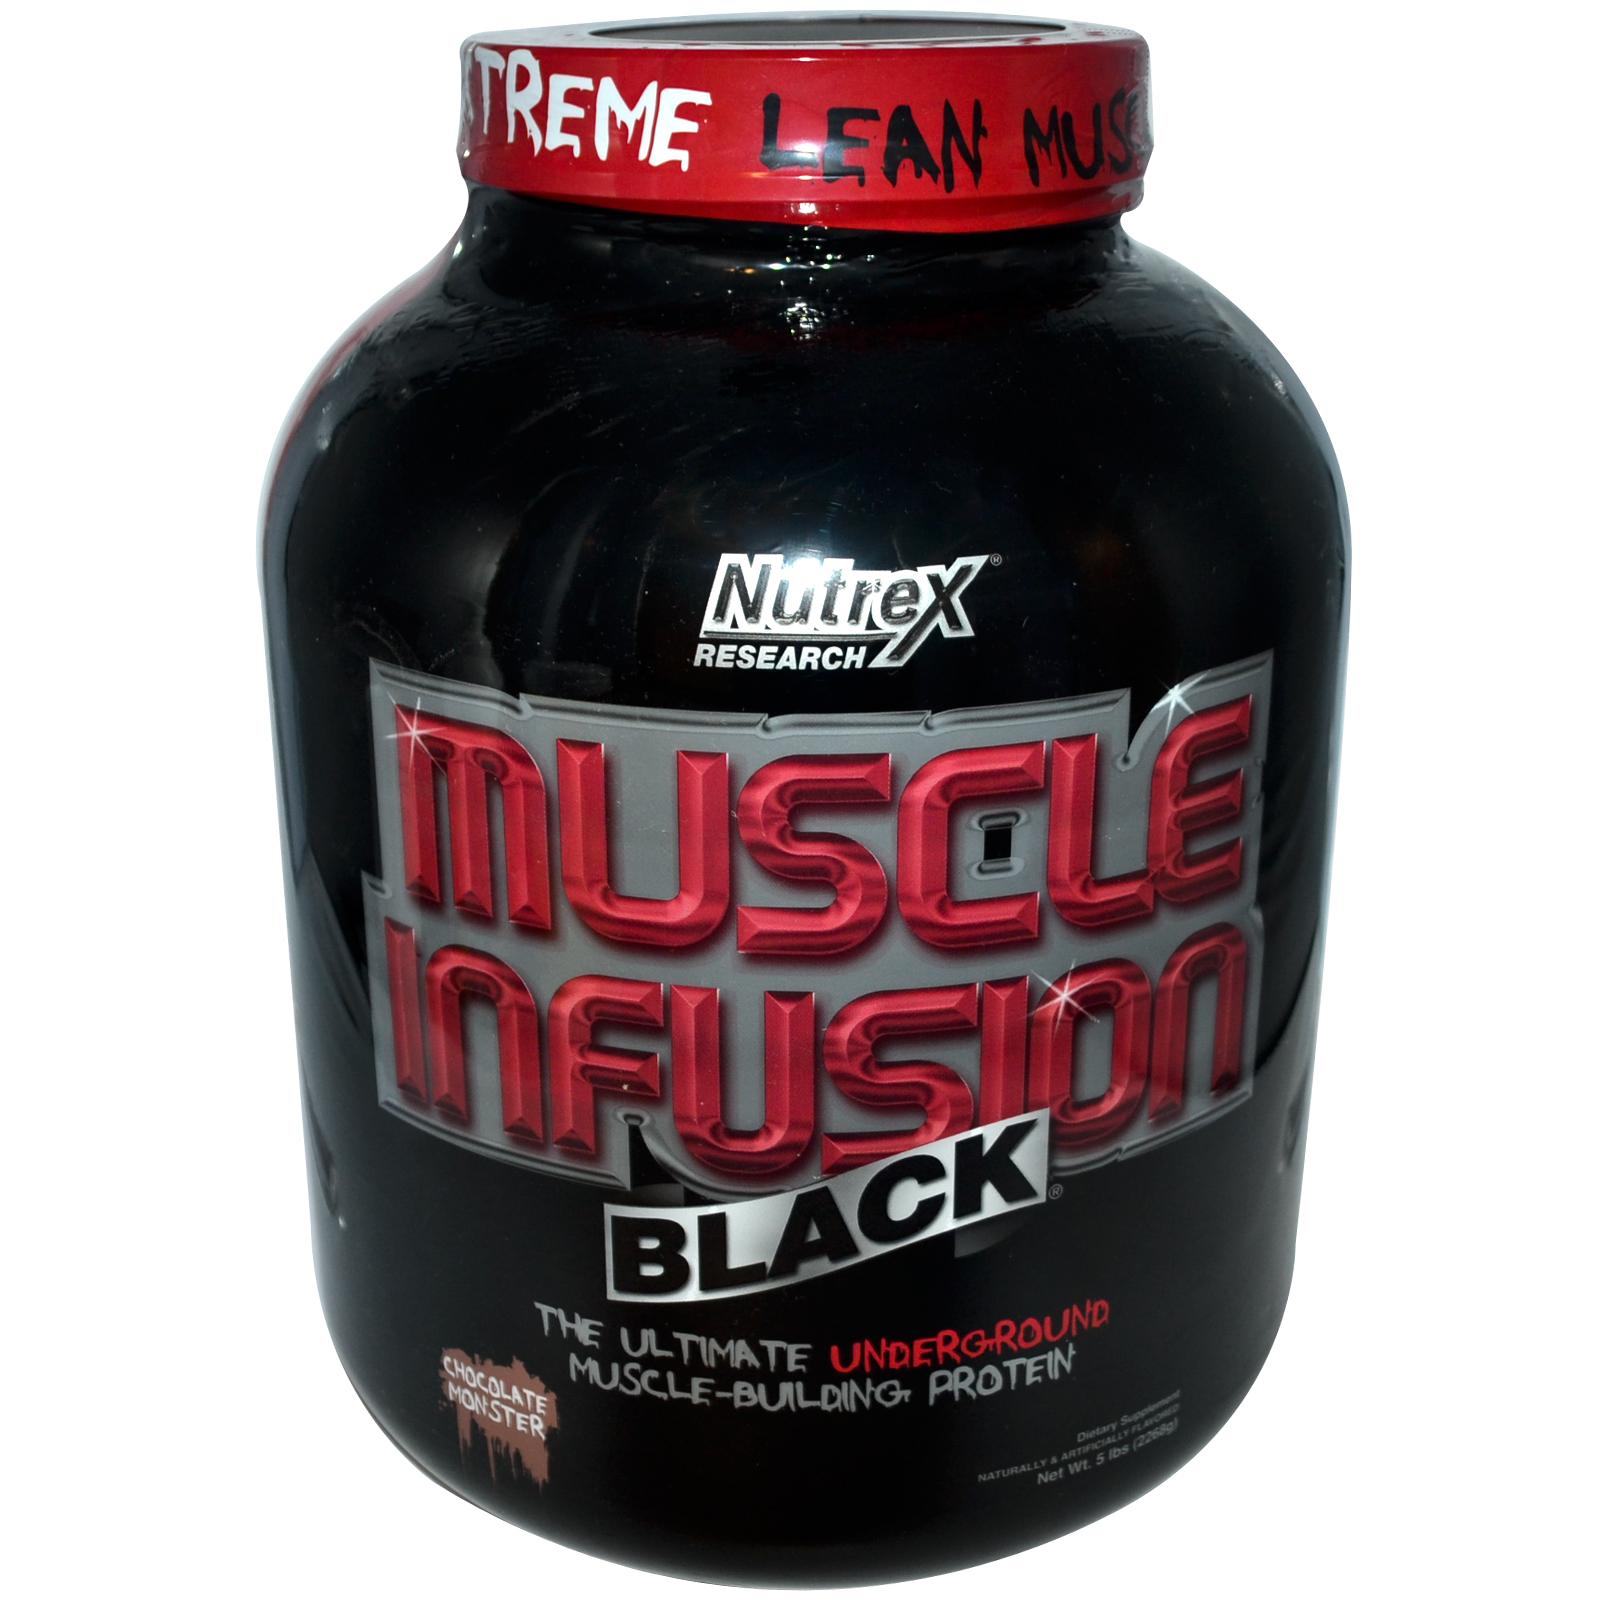 Nutrex - Muscle Infusion Black